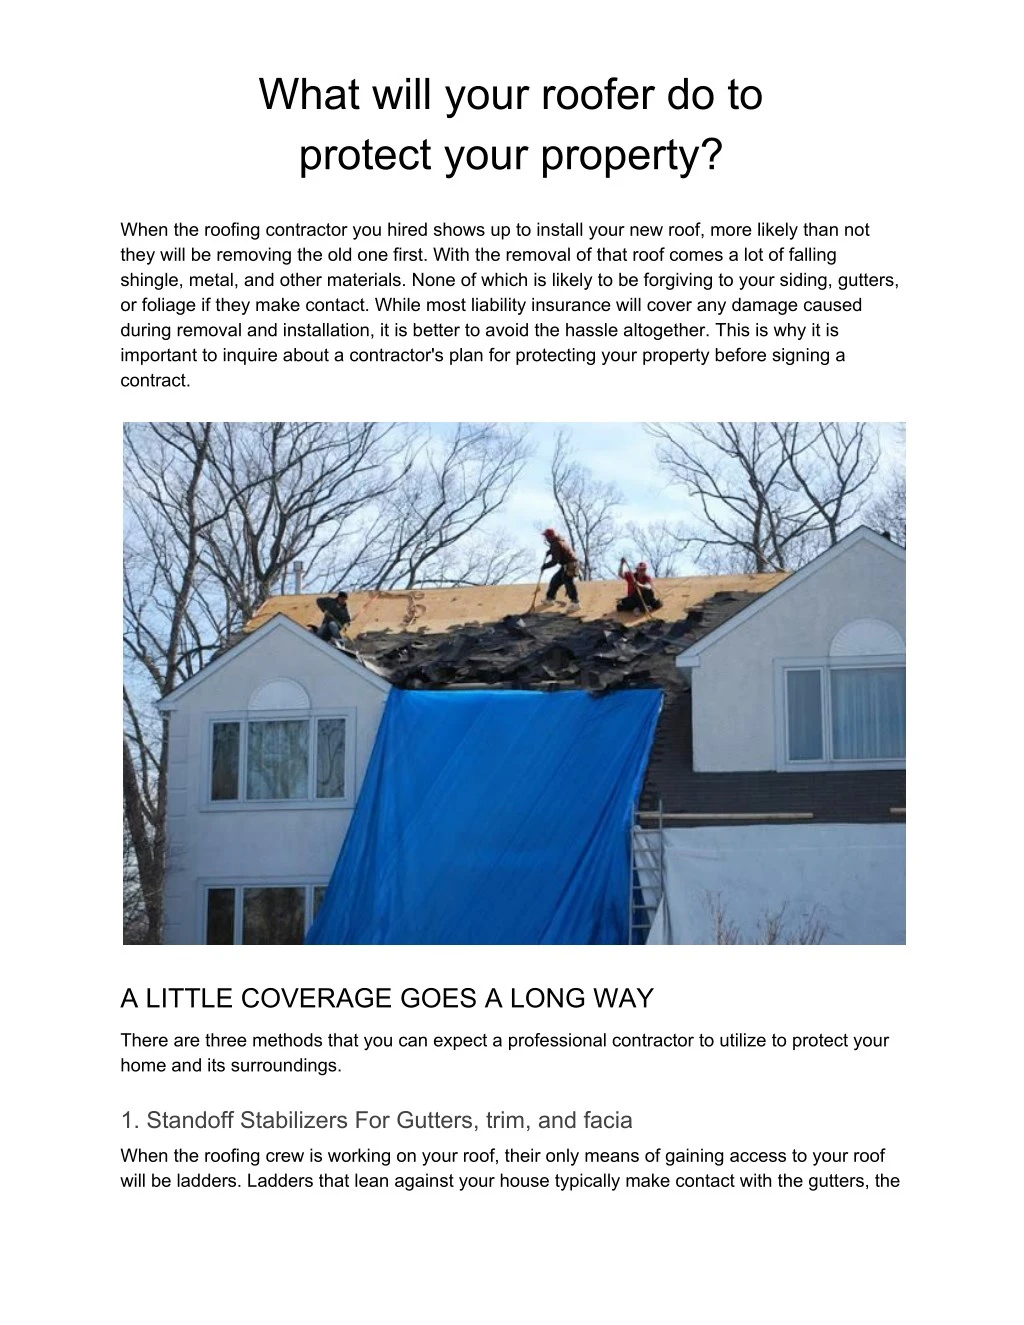 what will your roofer do to protect your property